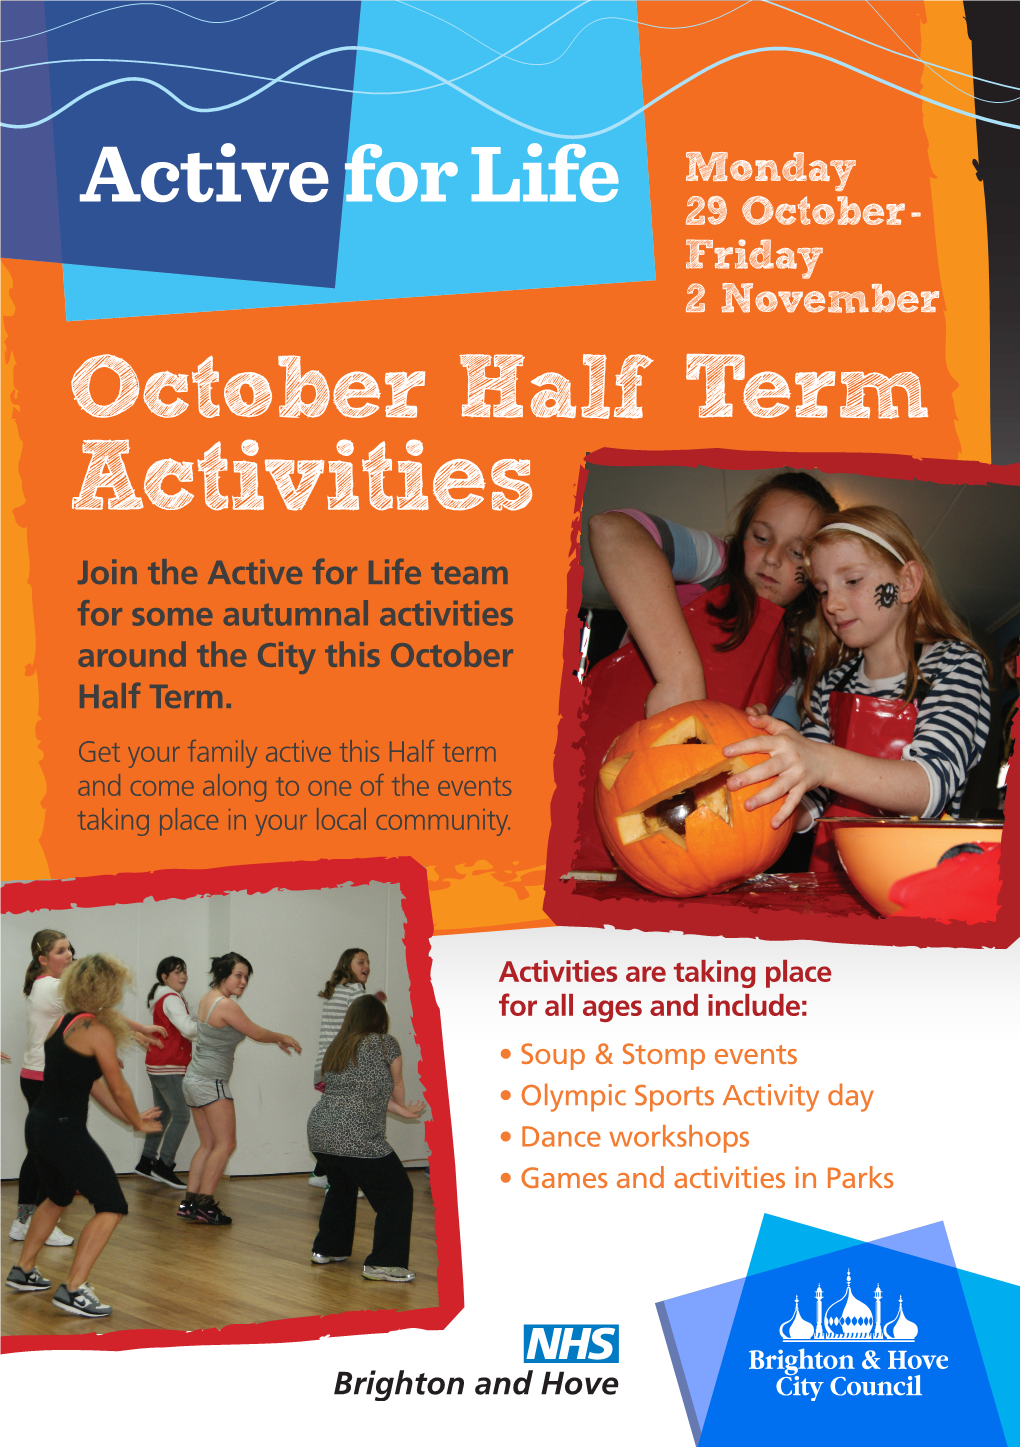 Activities Join the Active for Life Team for Some Autumnal Activities Around the City This October Half Term